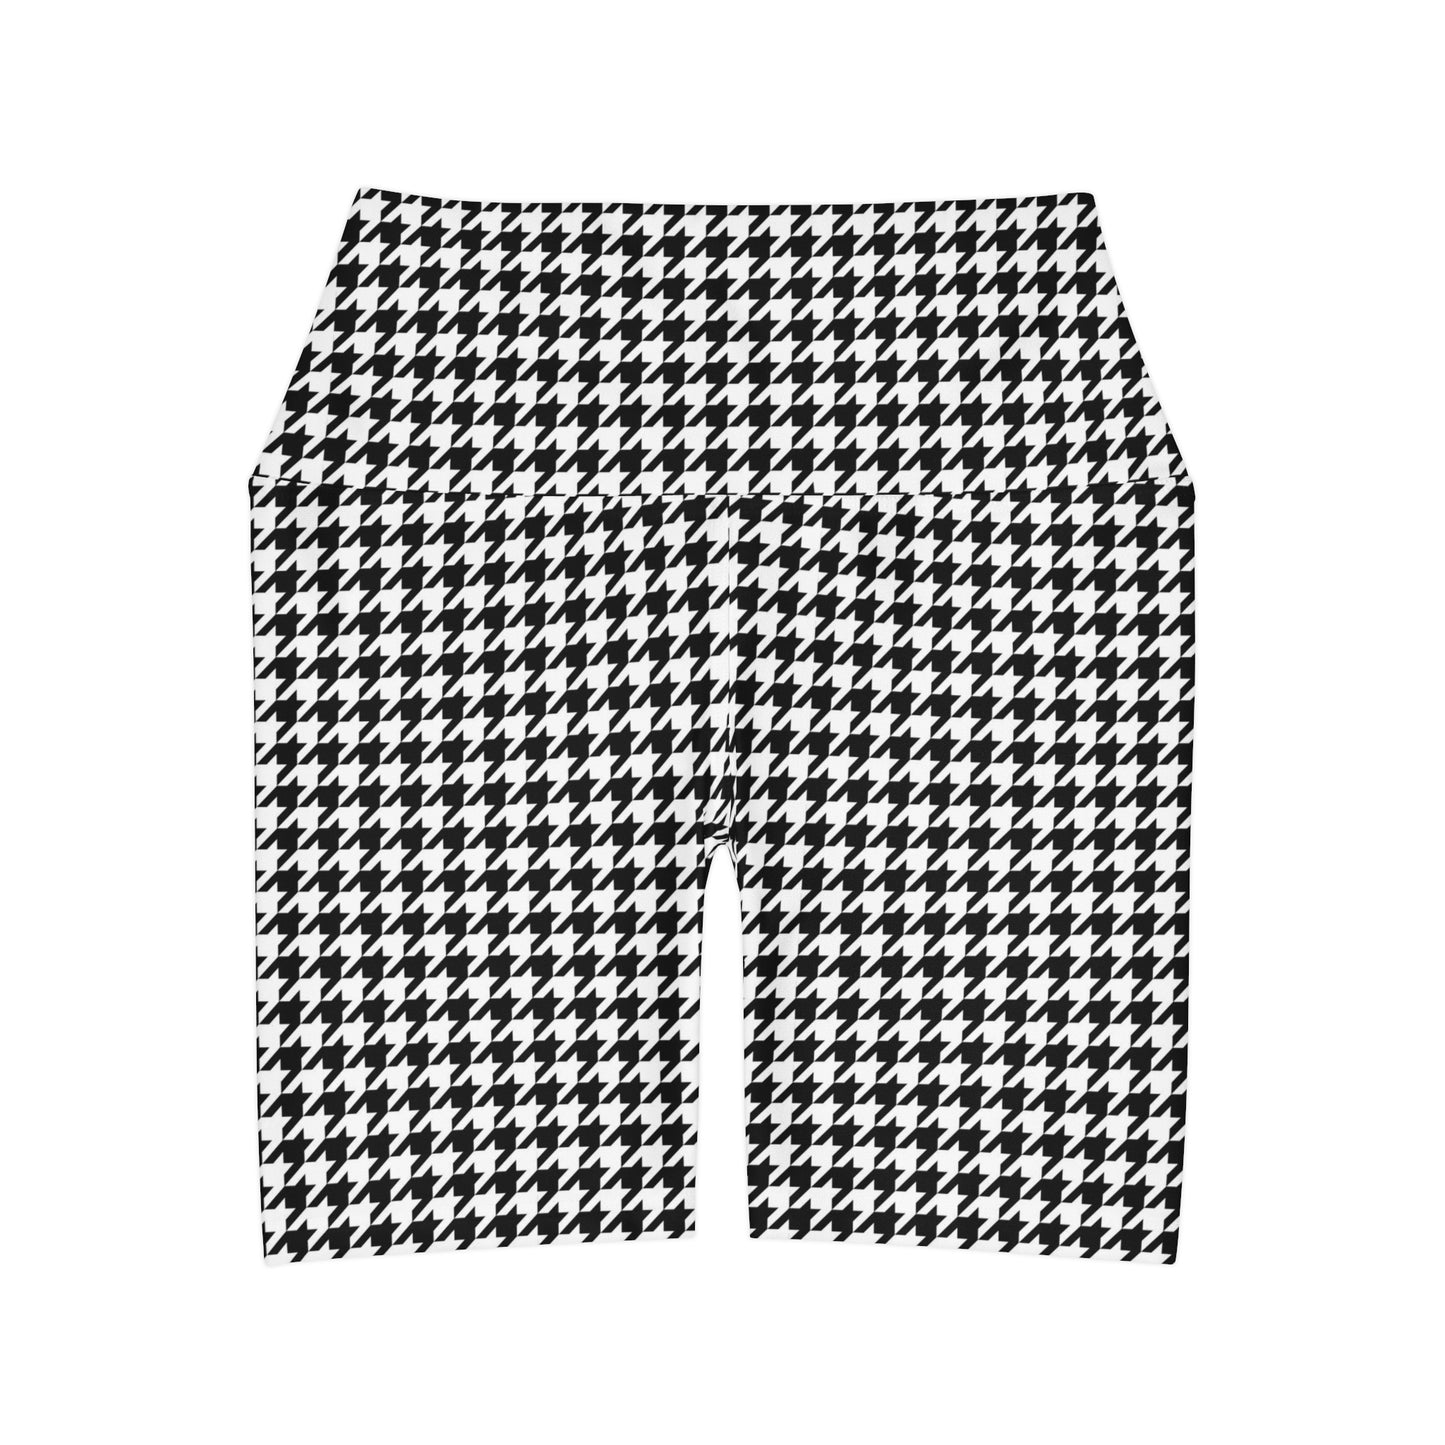 Houndstooth Women Shorts, White Black High Waisted Yoga Biker Cycling Sport Workout Gym Festival Running  Sexy Festival Spandex Bottoms